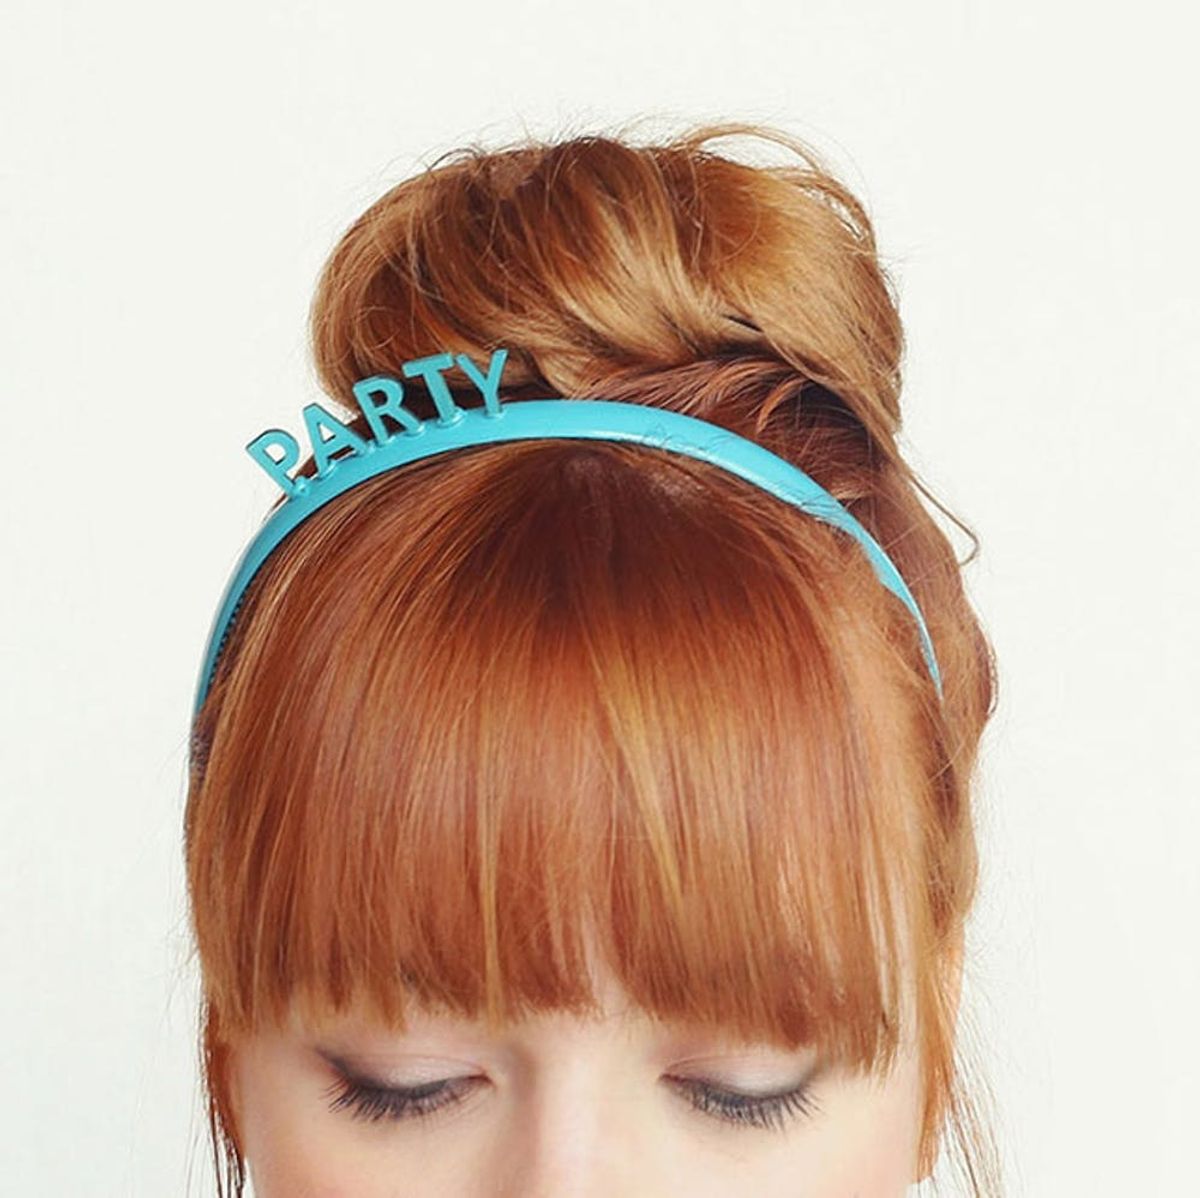 Up Your NYE Game With DIY Party Headbands